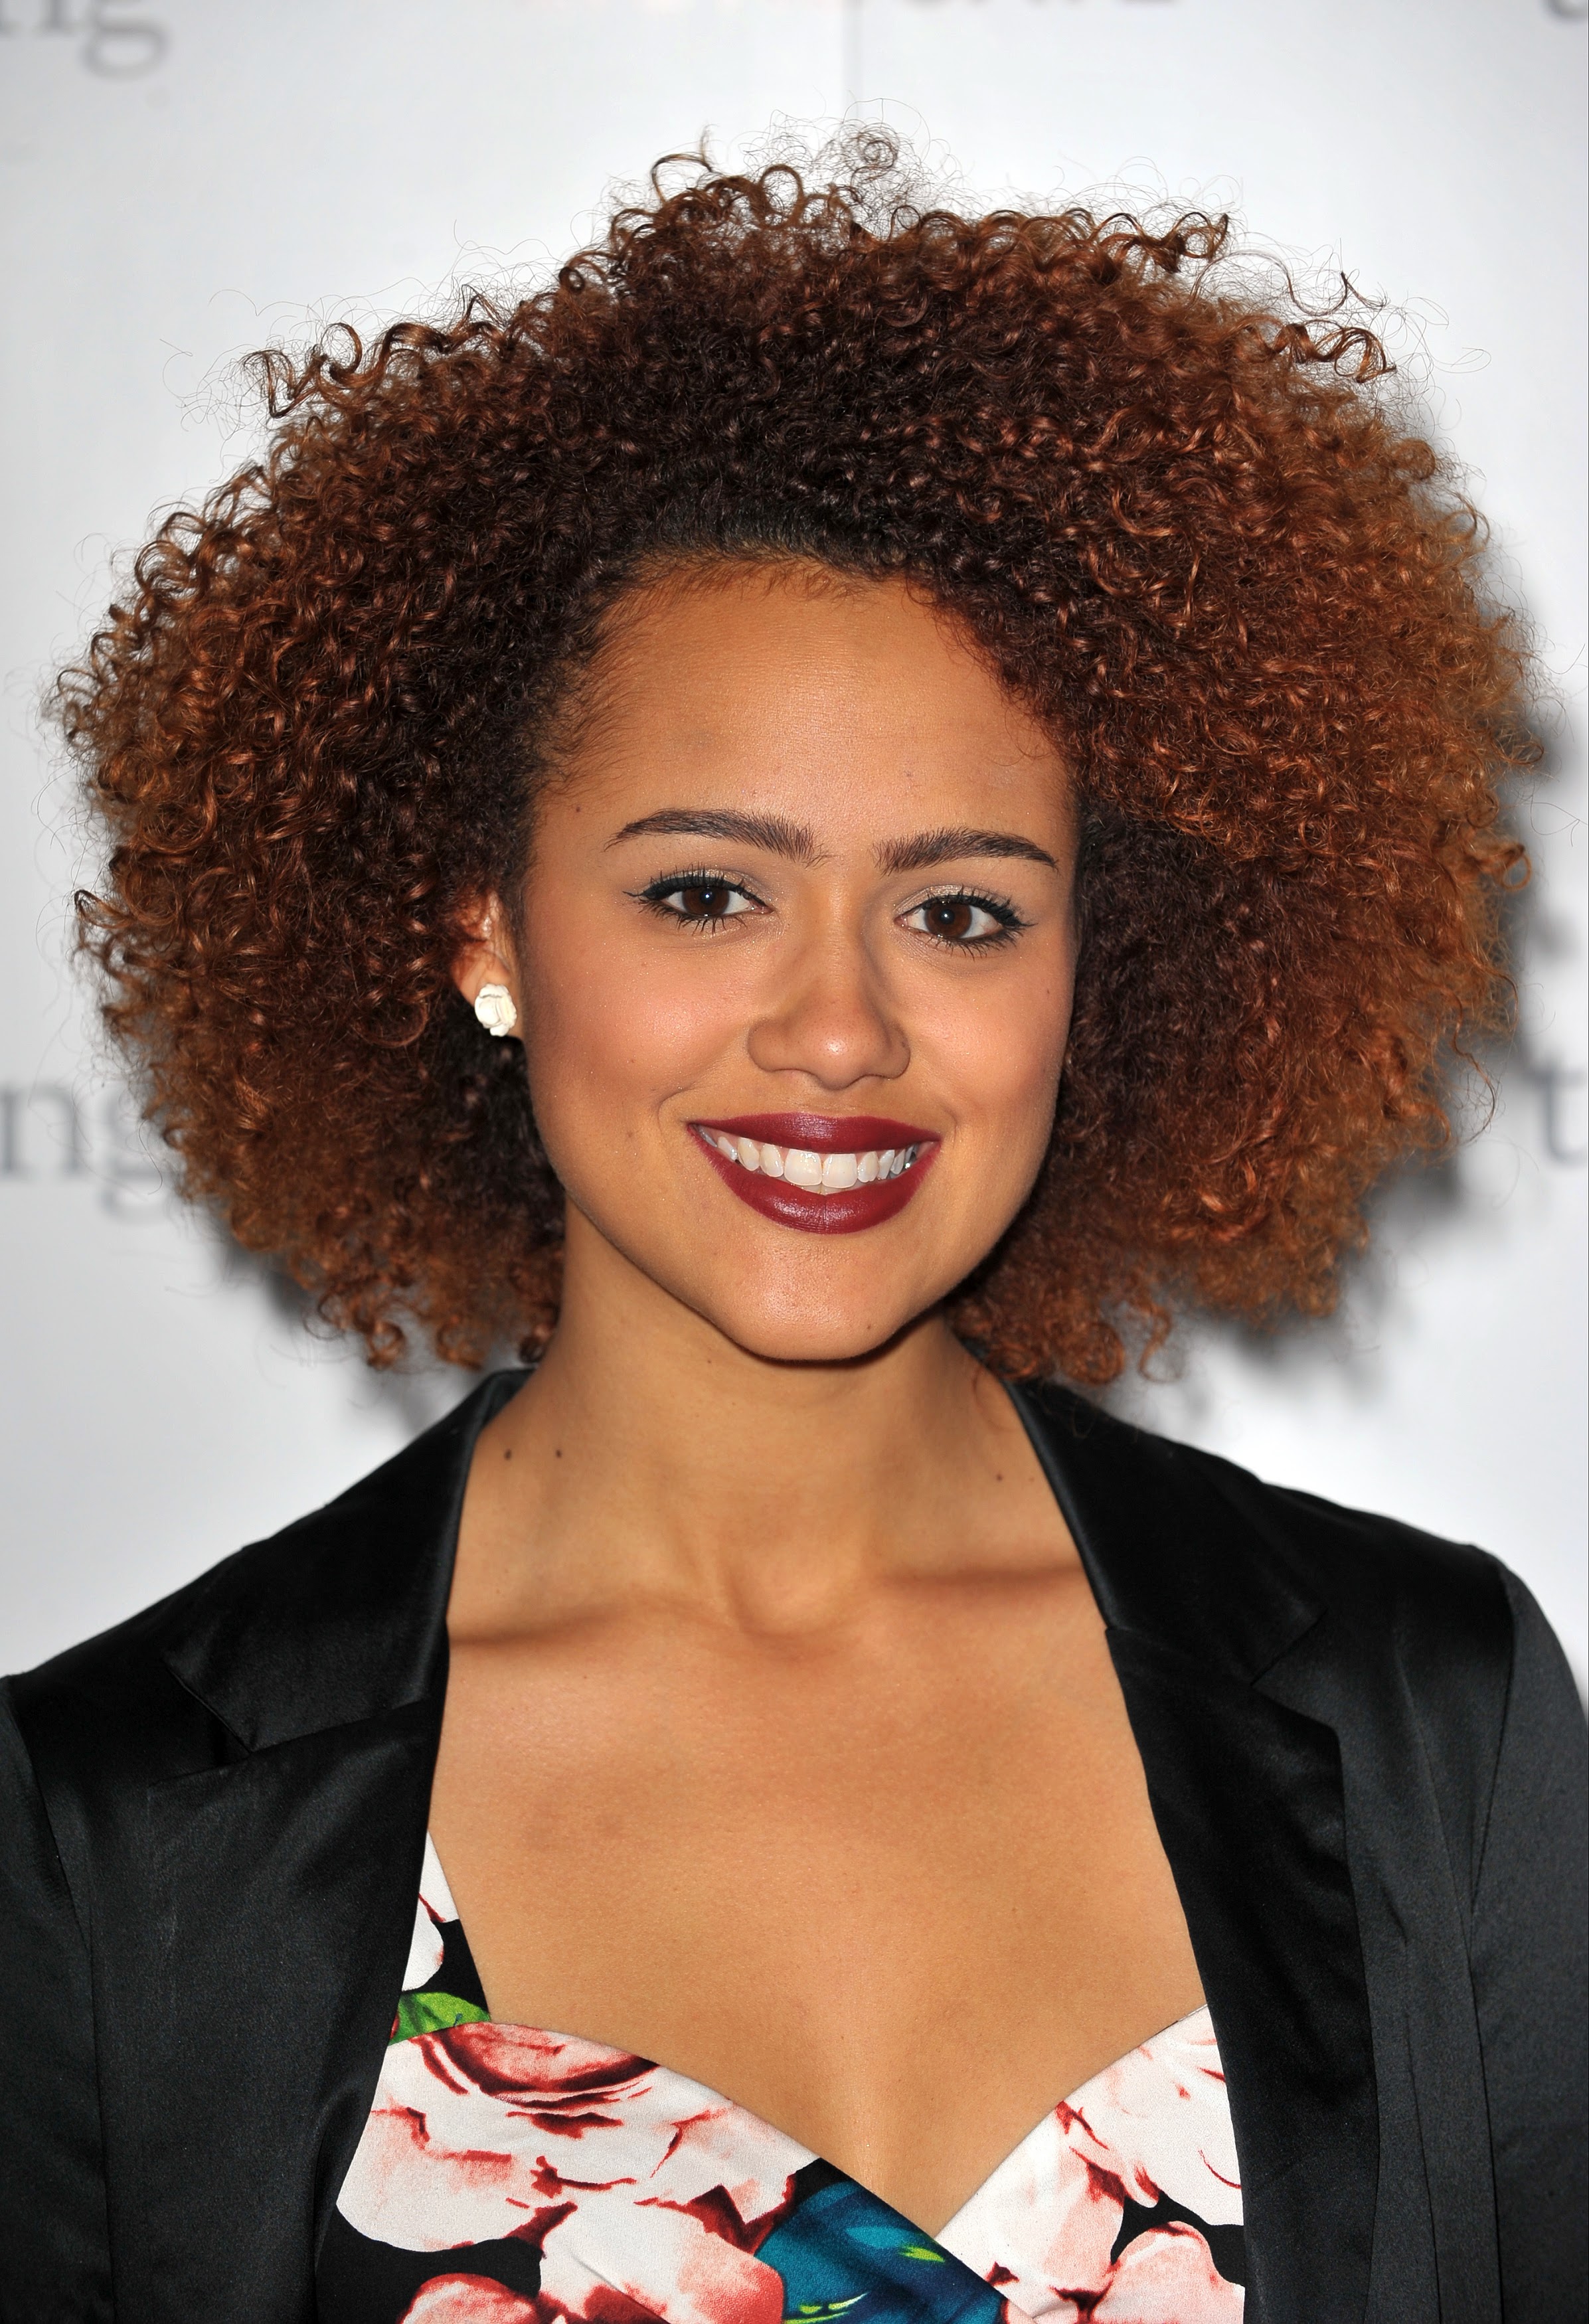 Nathalie Emmanuel pictures gallery (6) | Film Actresses